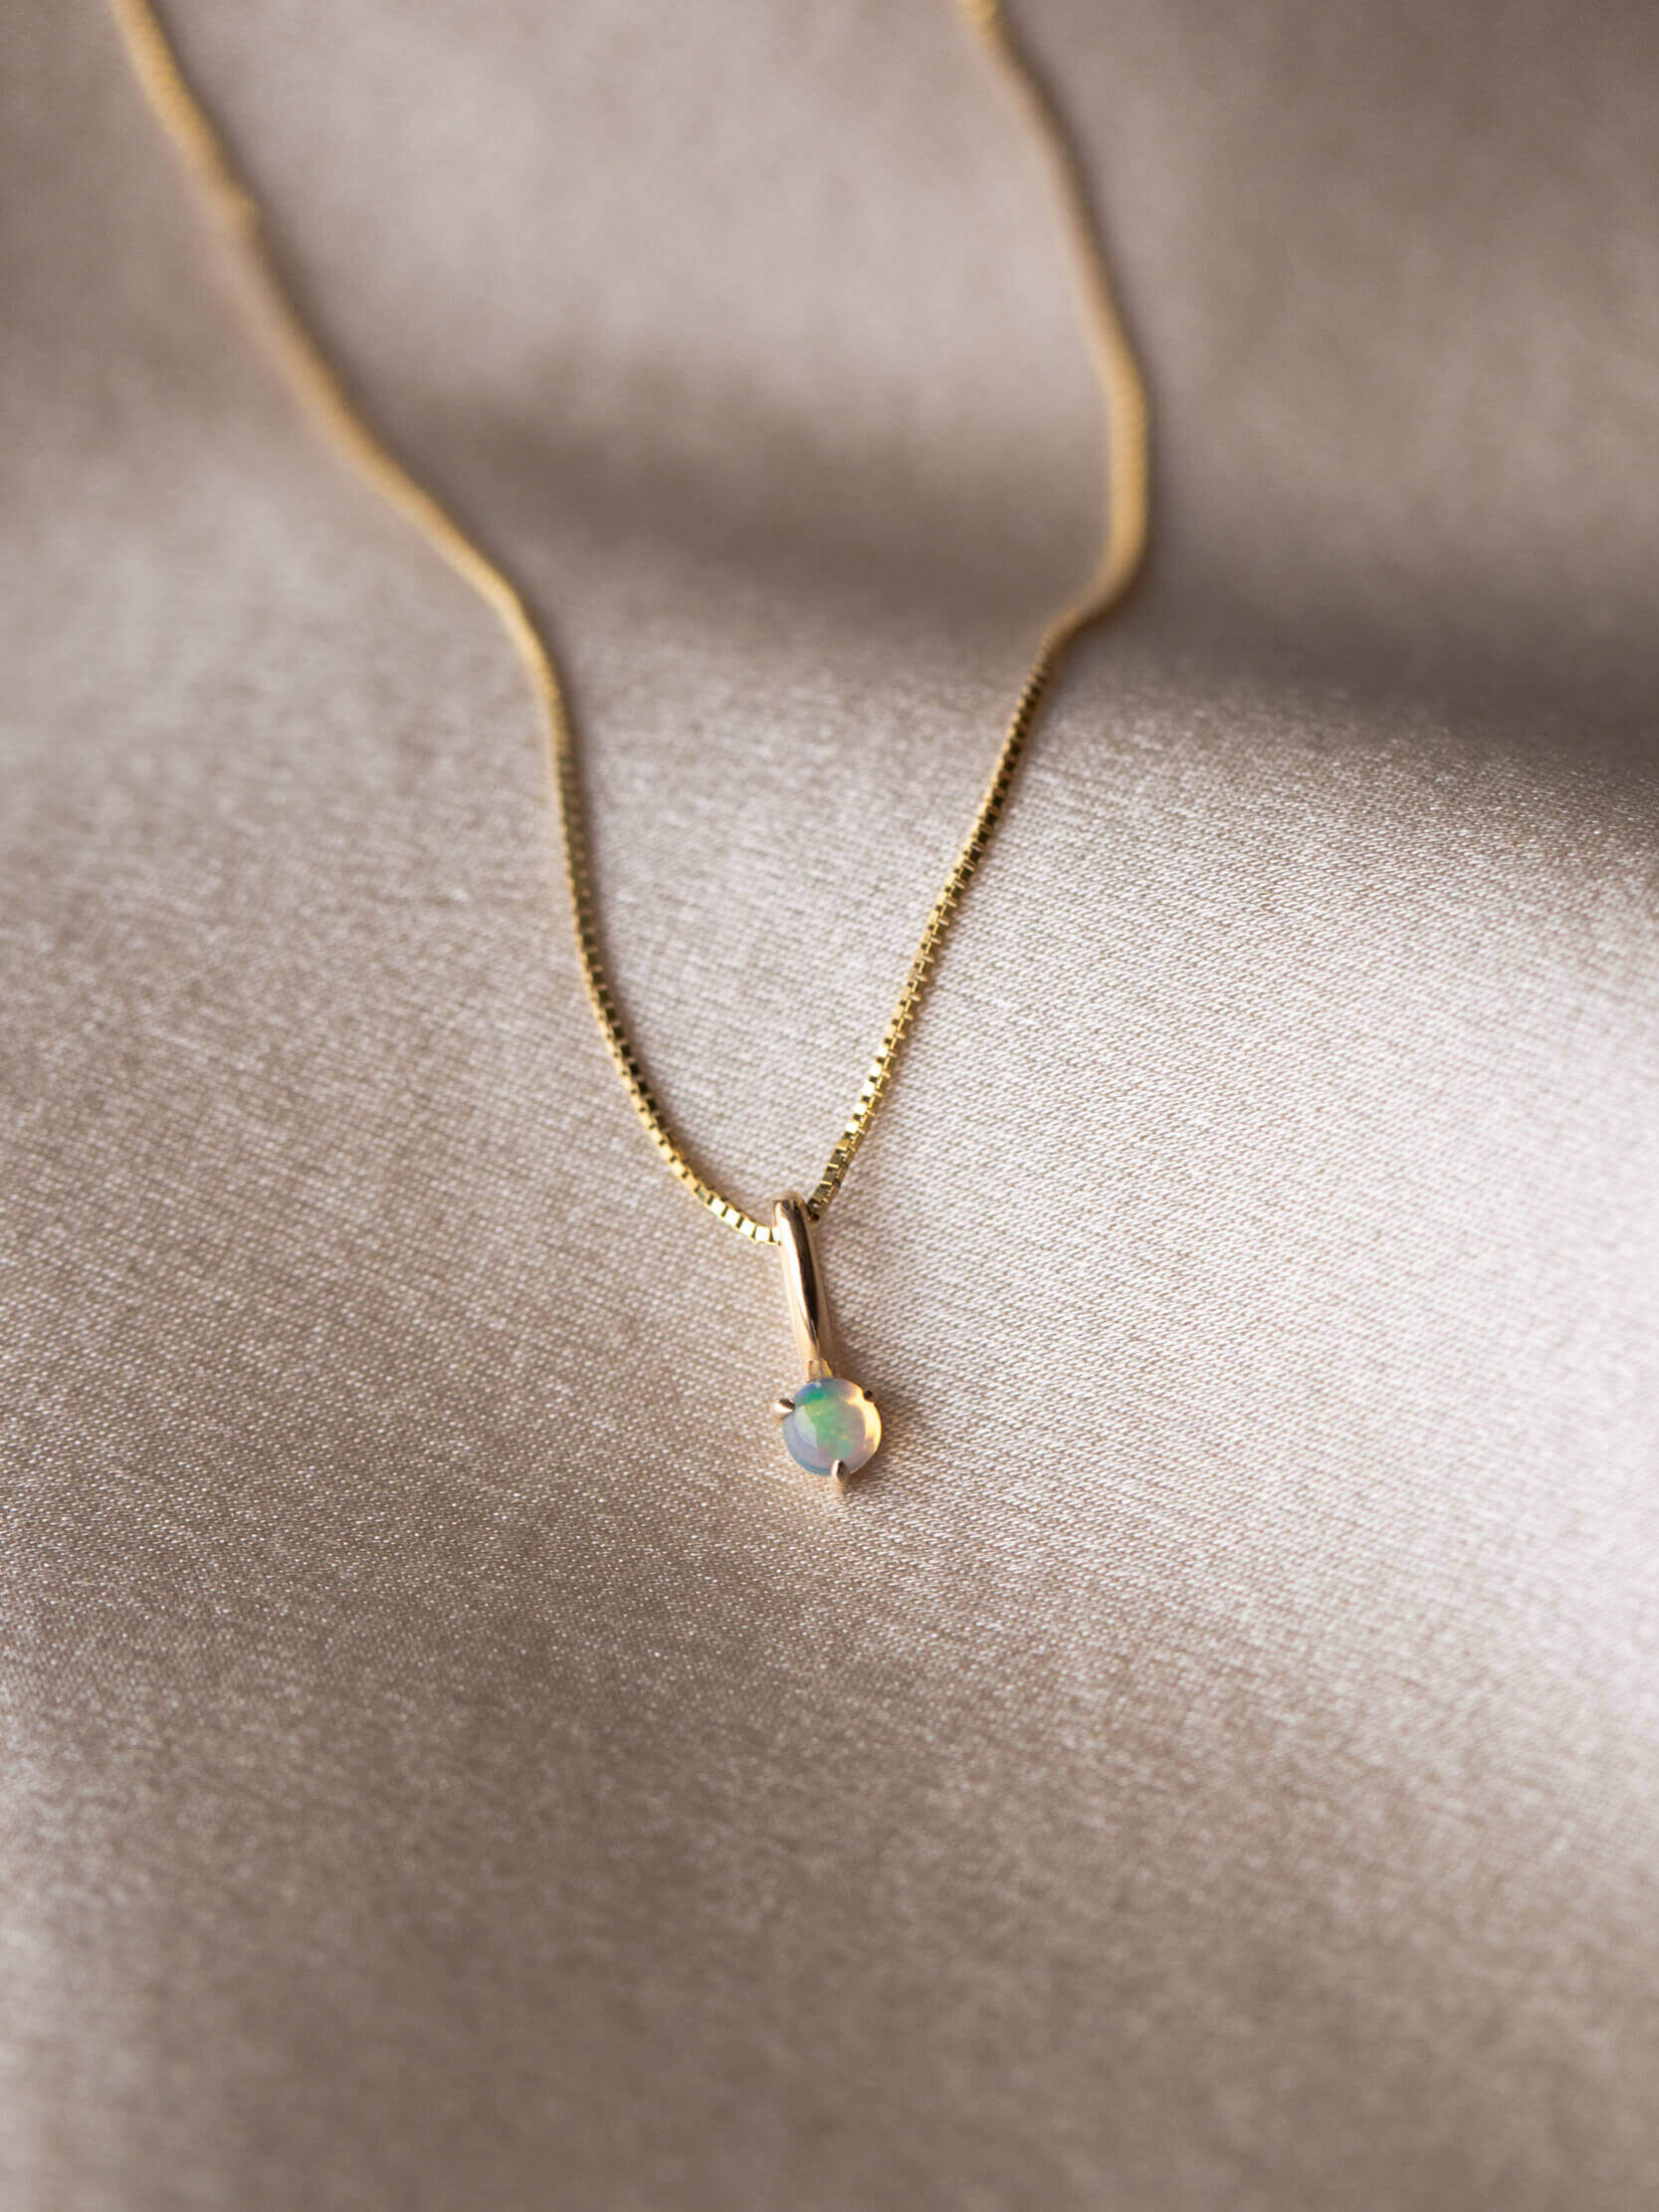 Gold necklace with a single gemstone pendant on a beige fabric surface.